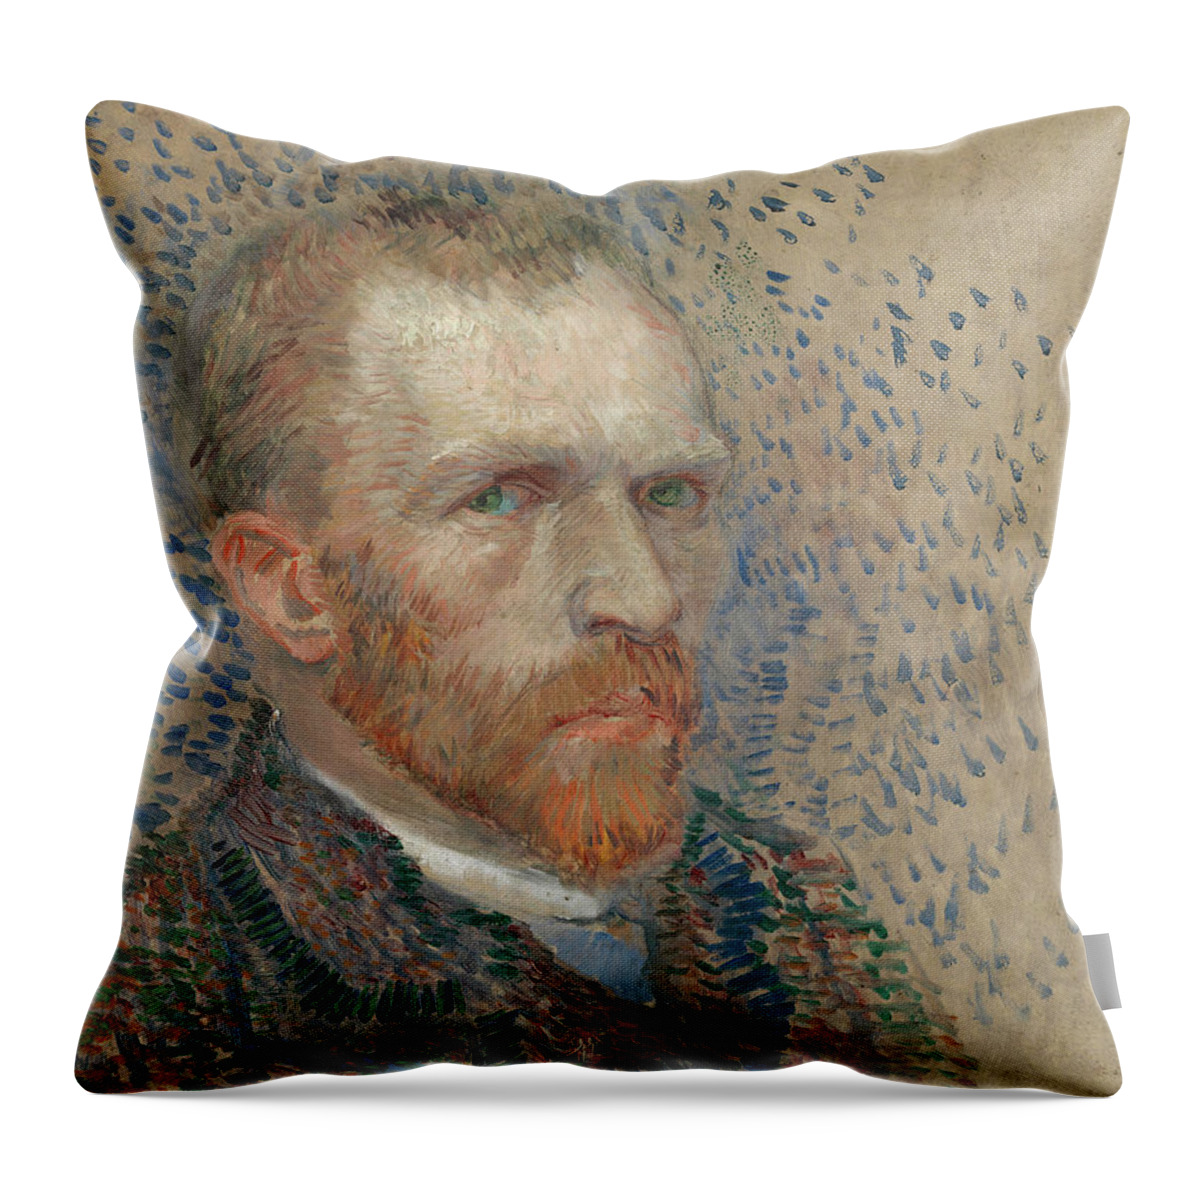 Vincent Van Gogh Throw Pillow featuring the painting Self-Portrait - 3 by Vincent Van Gogh